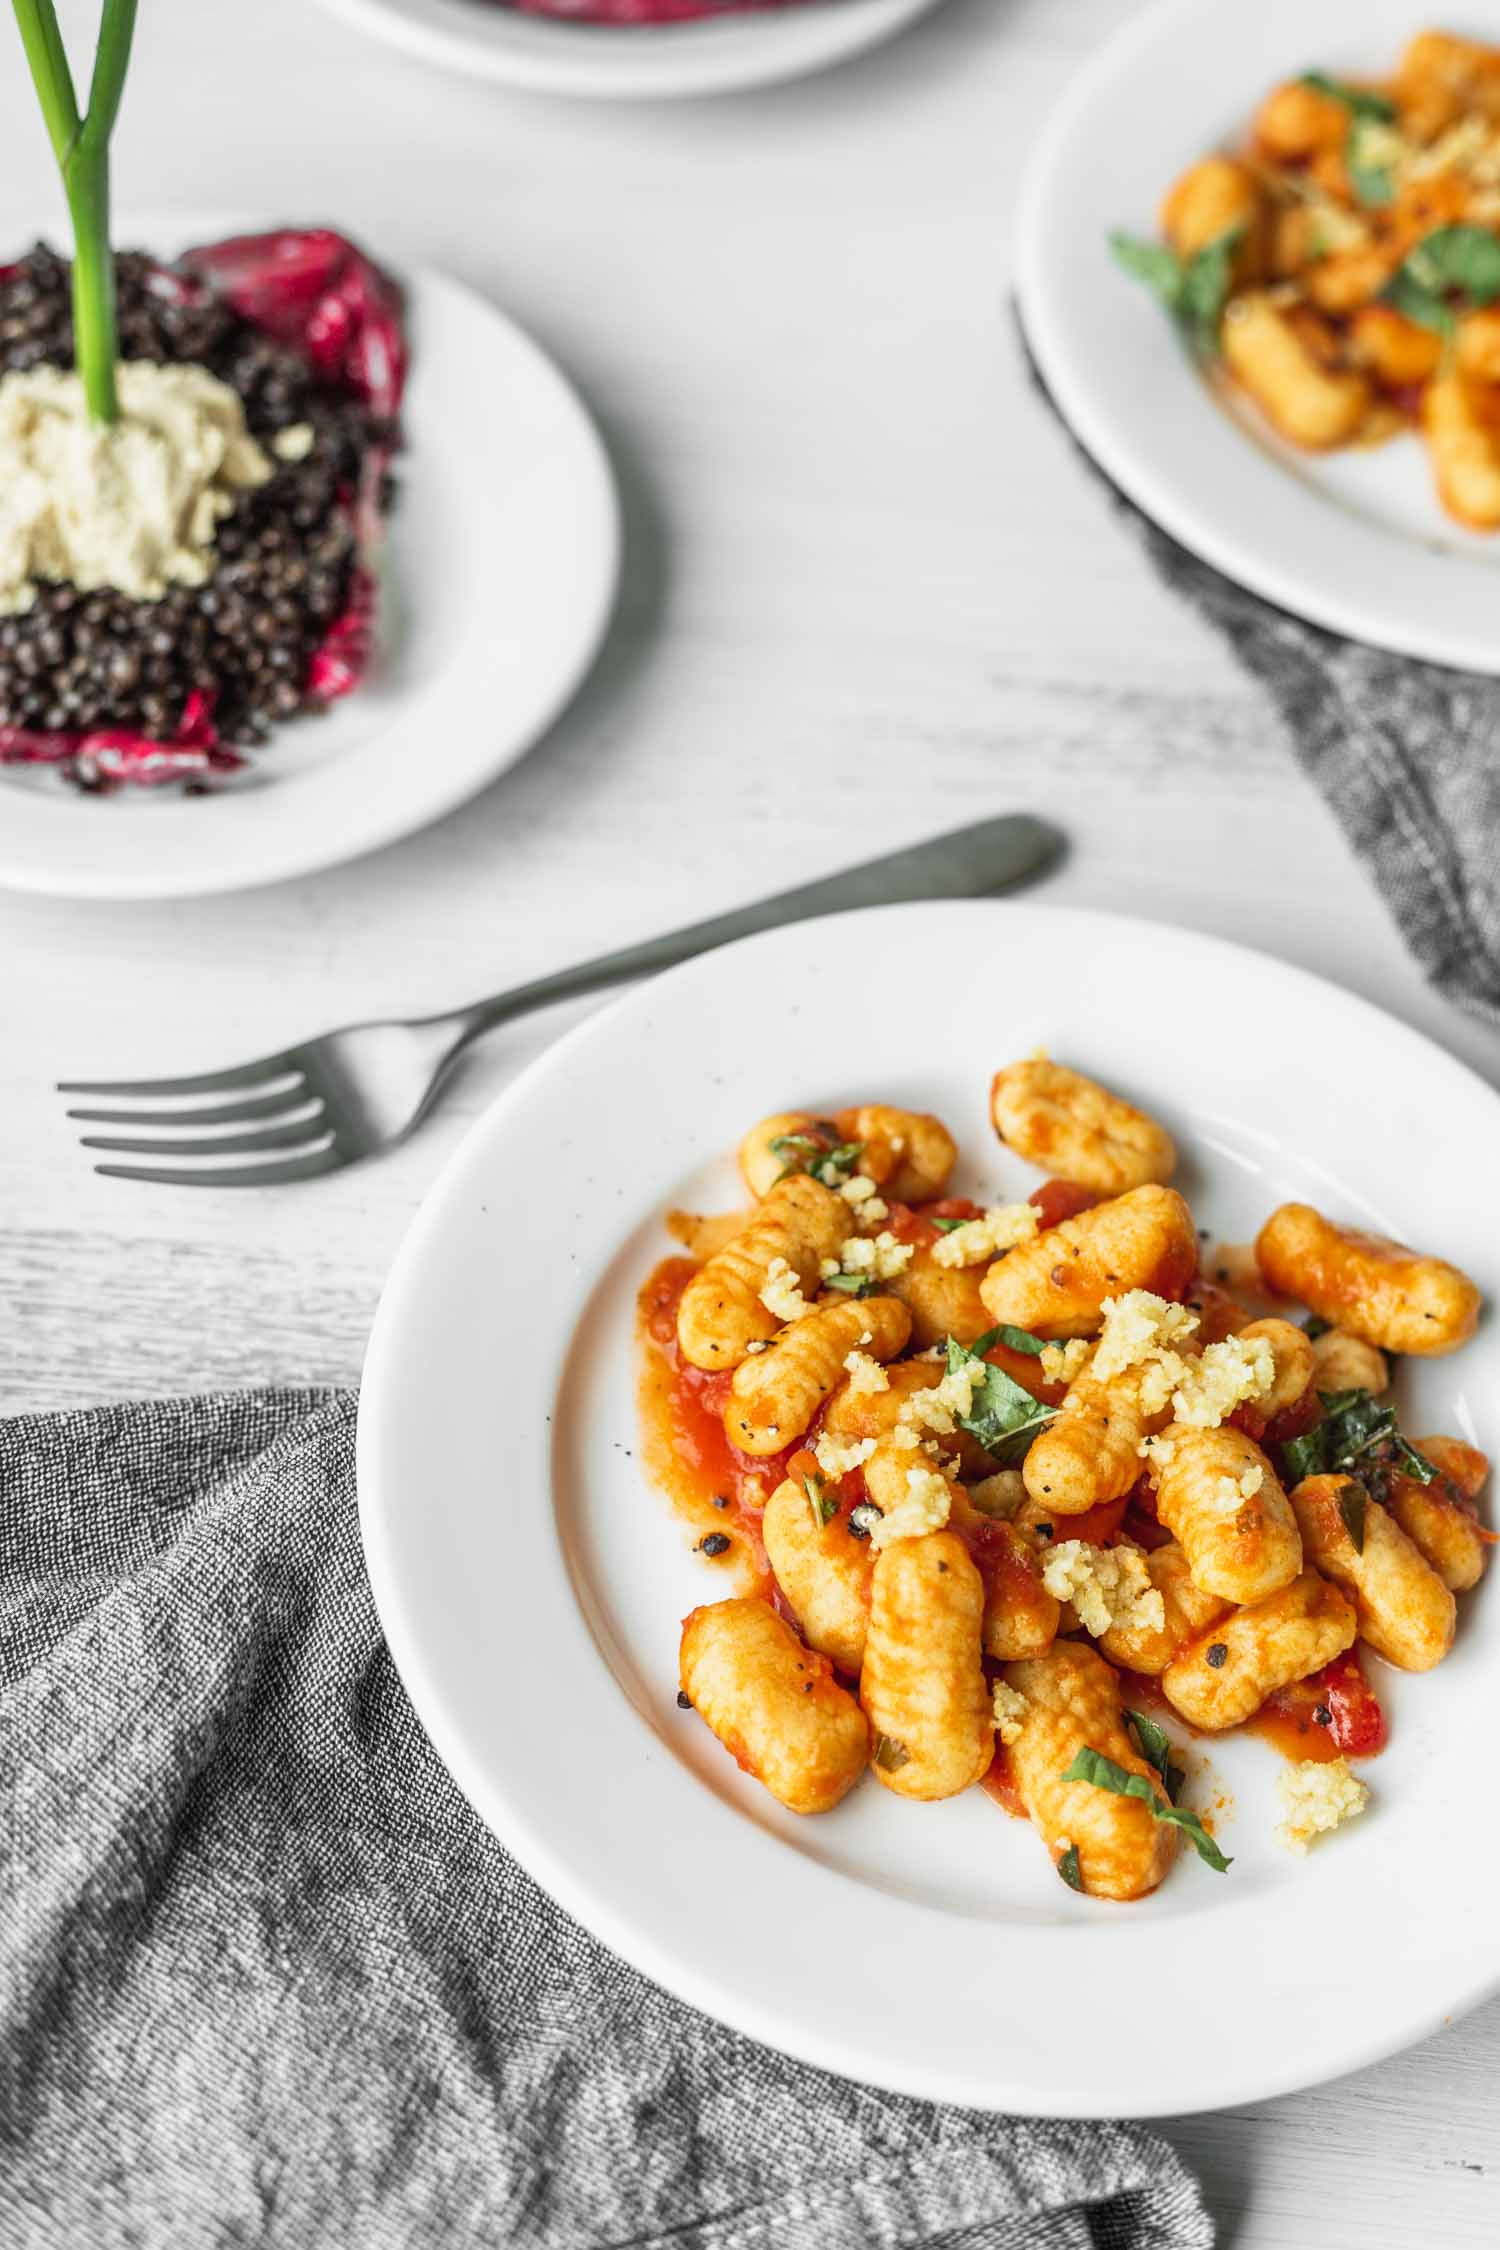 Gluten-free Dairy-free Gnocchi Recipe from  The Plantpower Way: Italia Cookbook  by Julie Piatt and Rich Roll. Photo by Kari of Beautiful Ingredient.